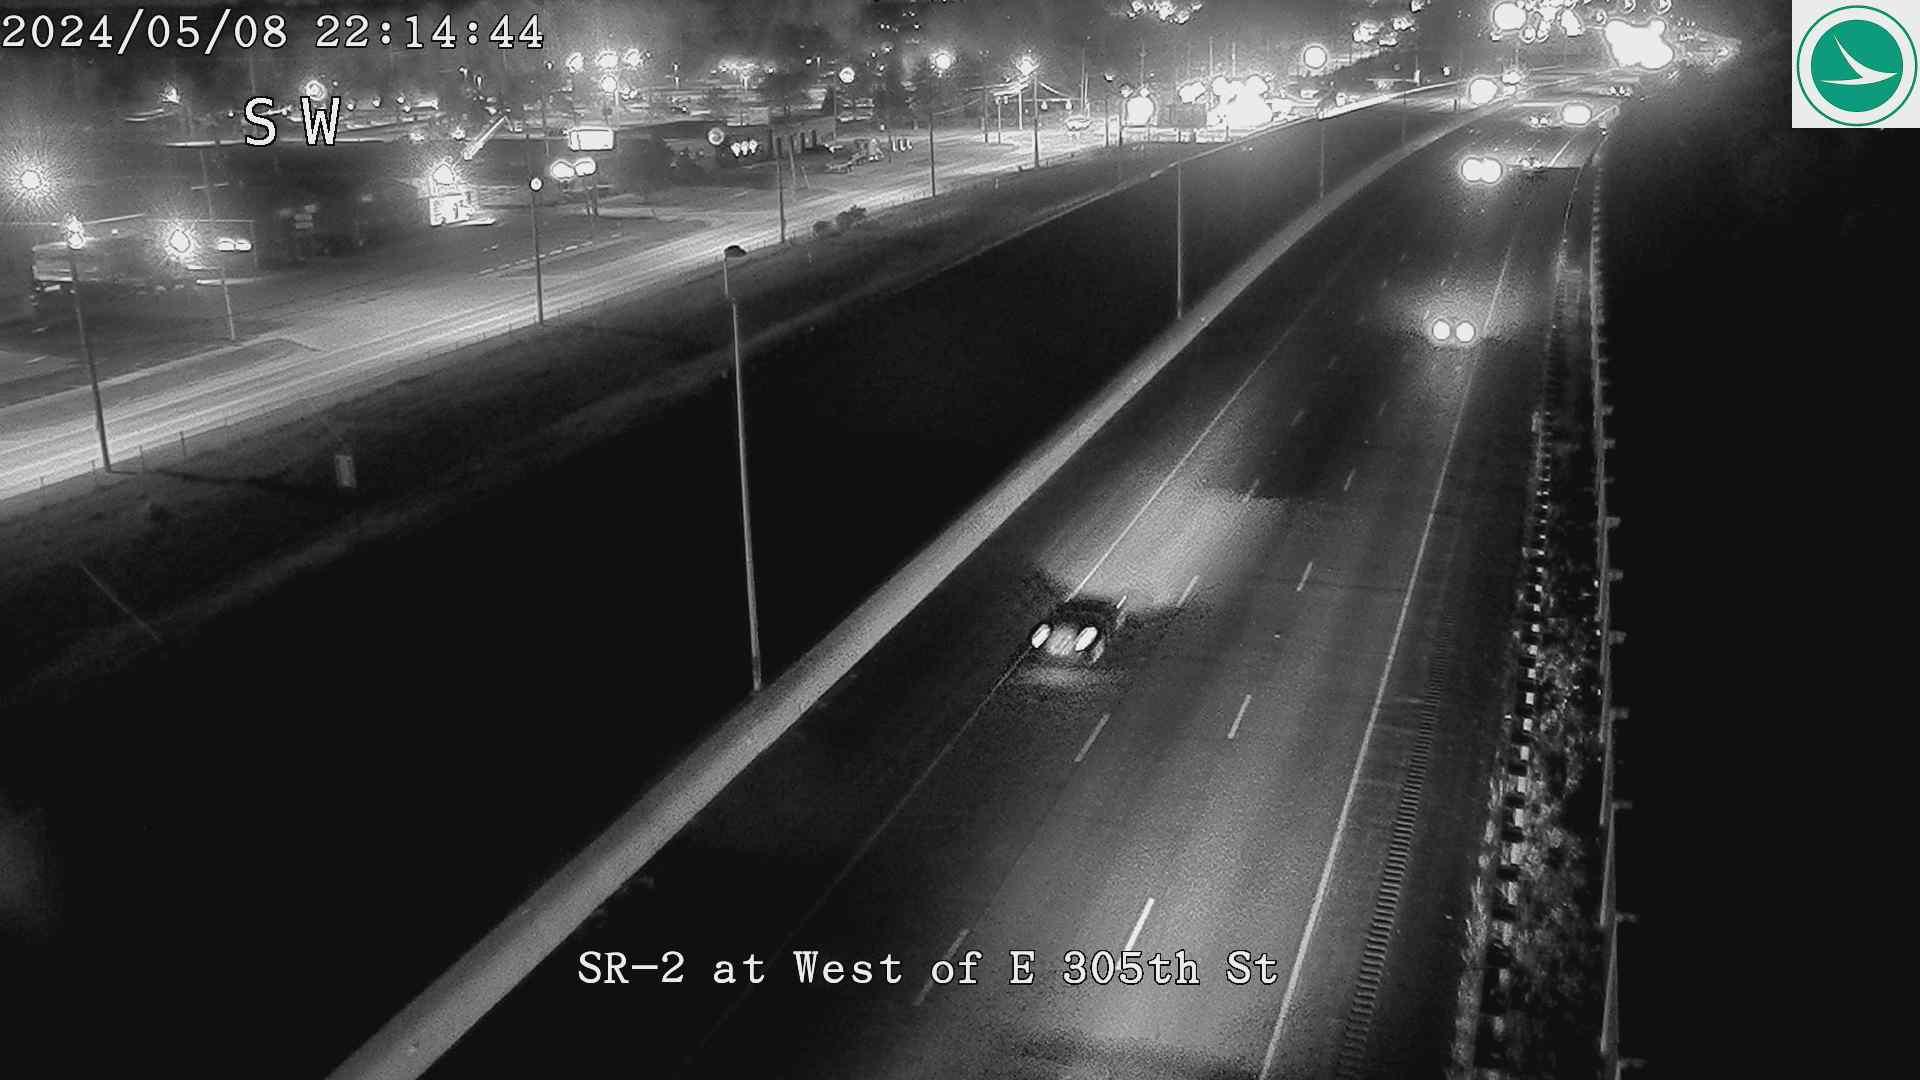 Traffic Cam Wickliffe: SR-2 at West of E 305th St Player